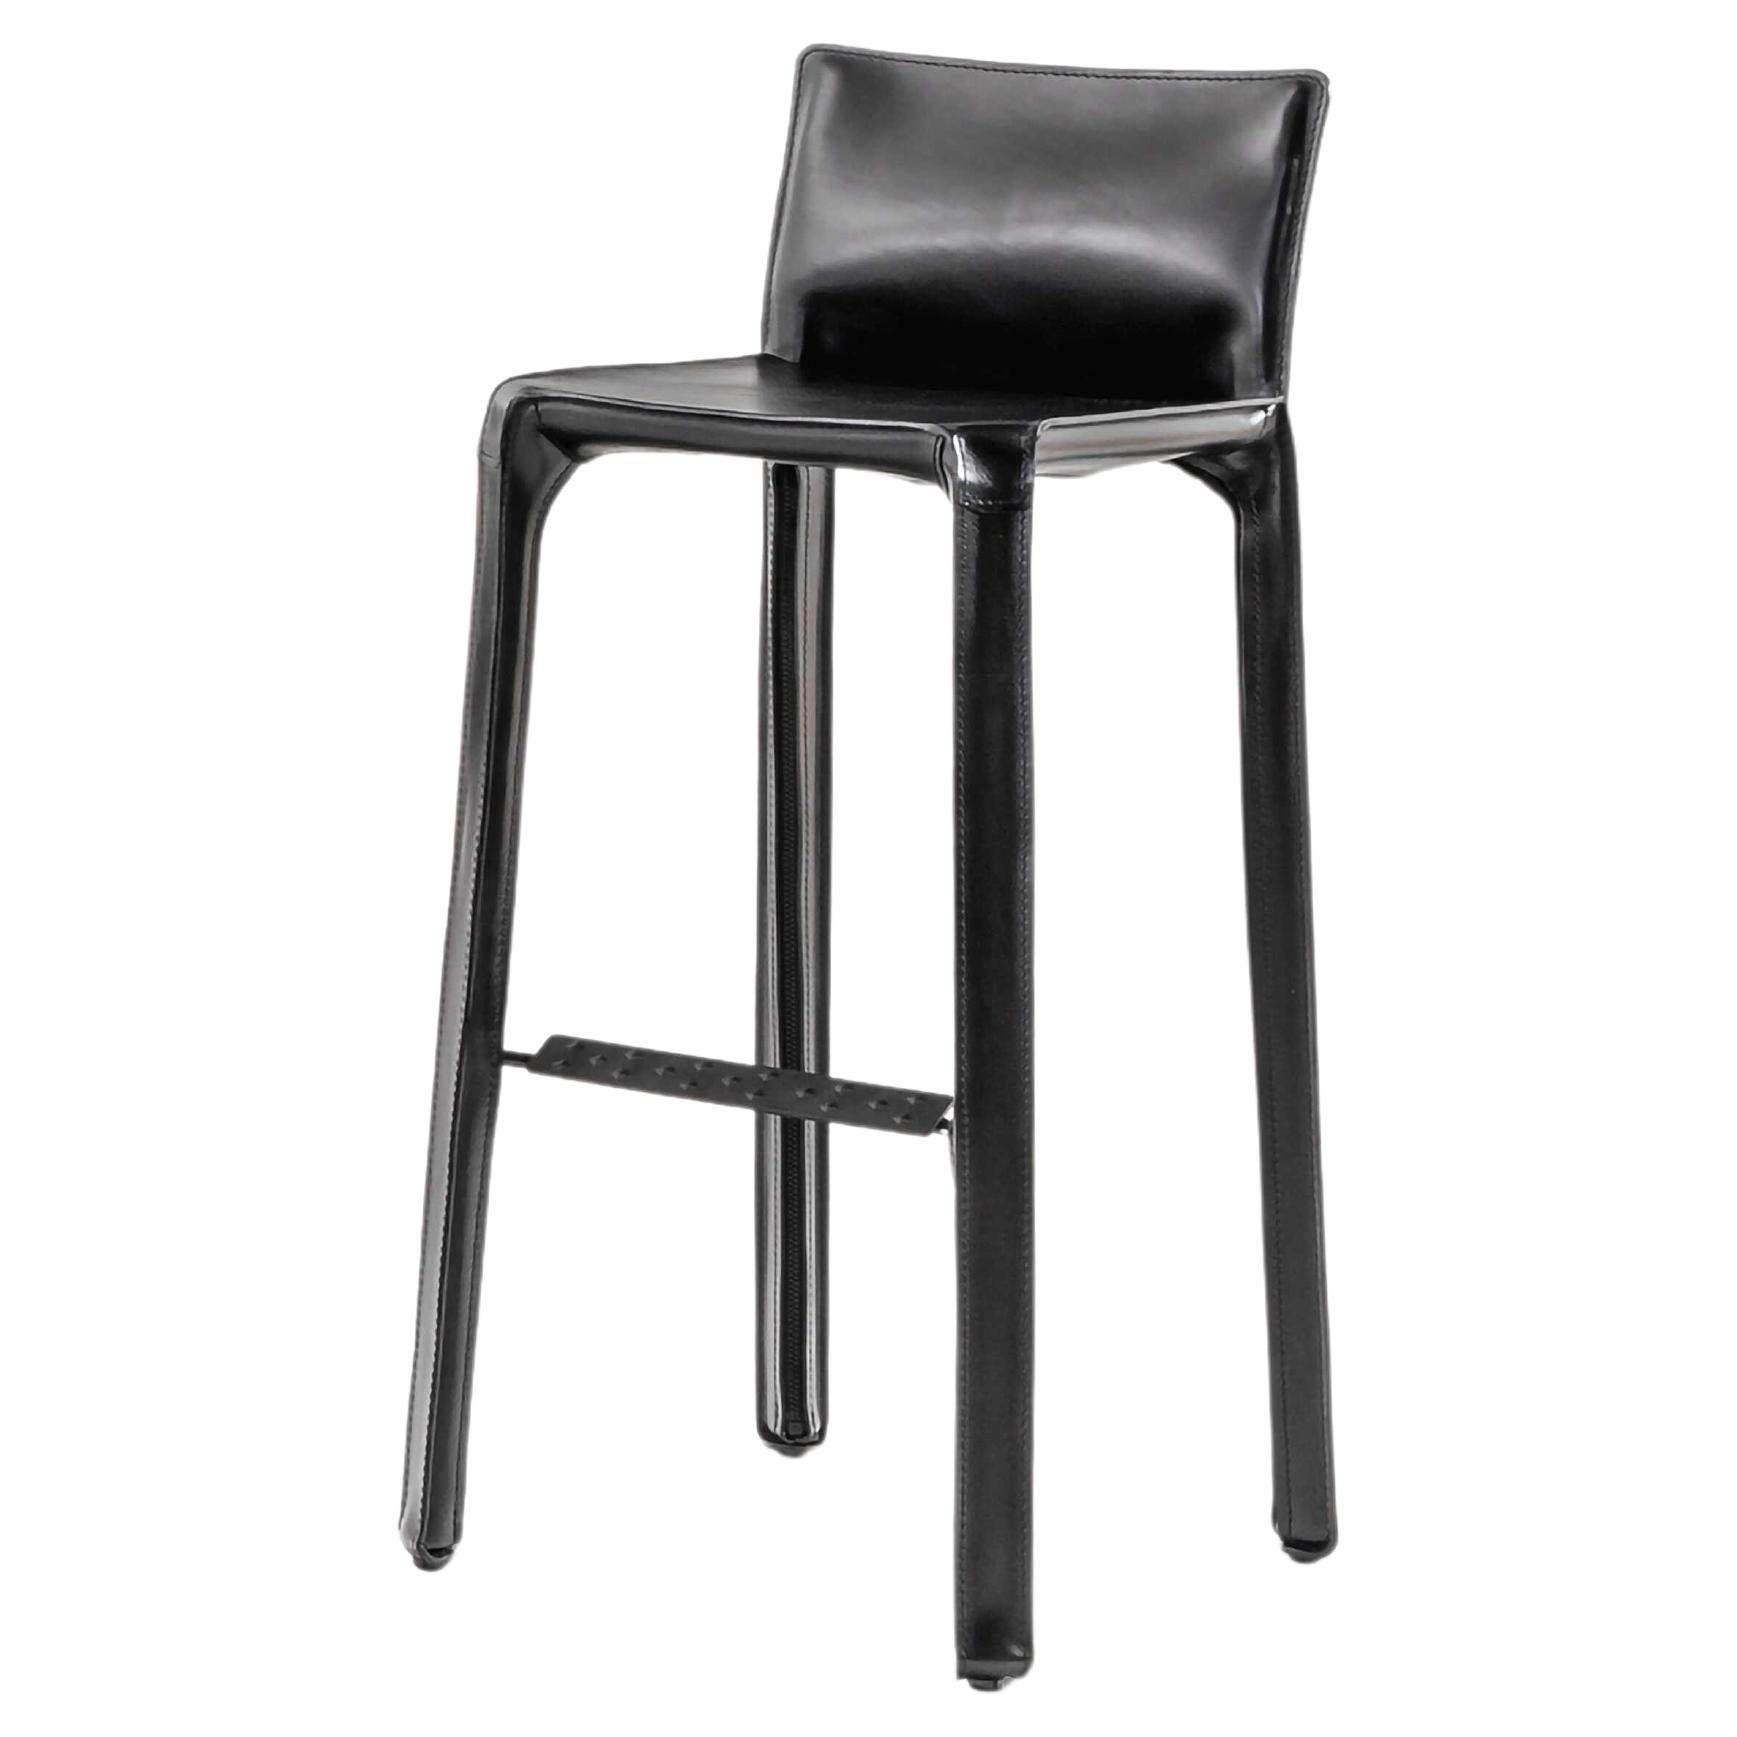 Mario Bellini Cab 410 leather stool for Cassina, Italy - new For Sale